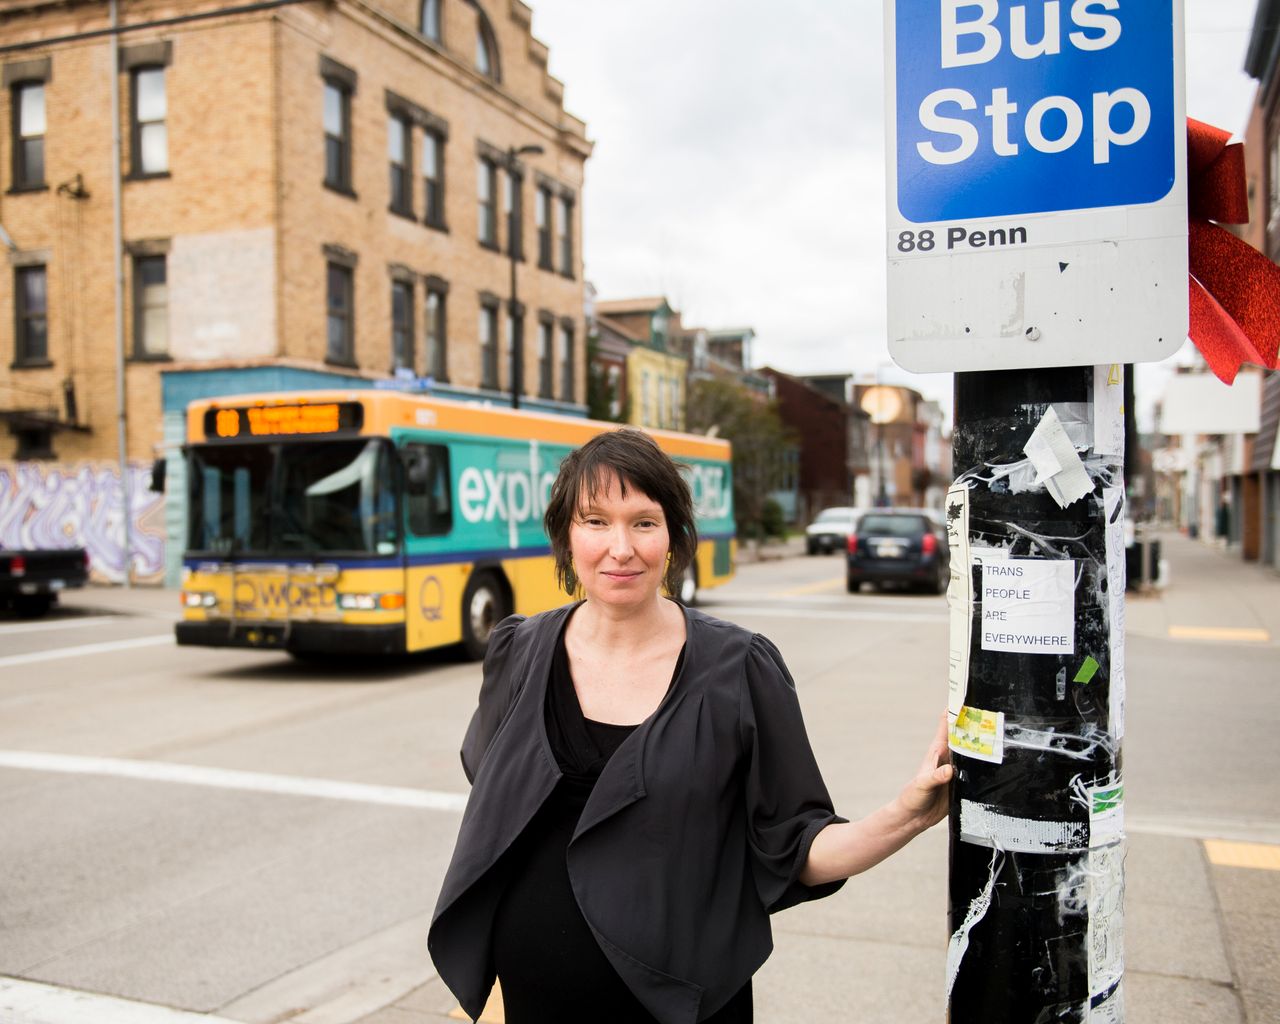 Laura Wiens serves as director of Pittsburghers for Public Transit, whose board members include Green.